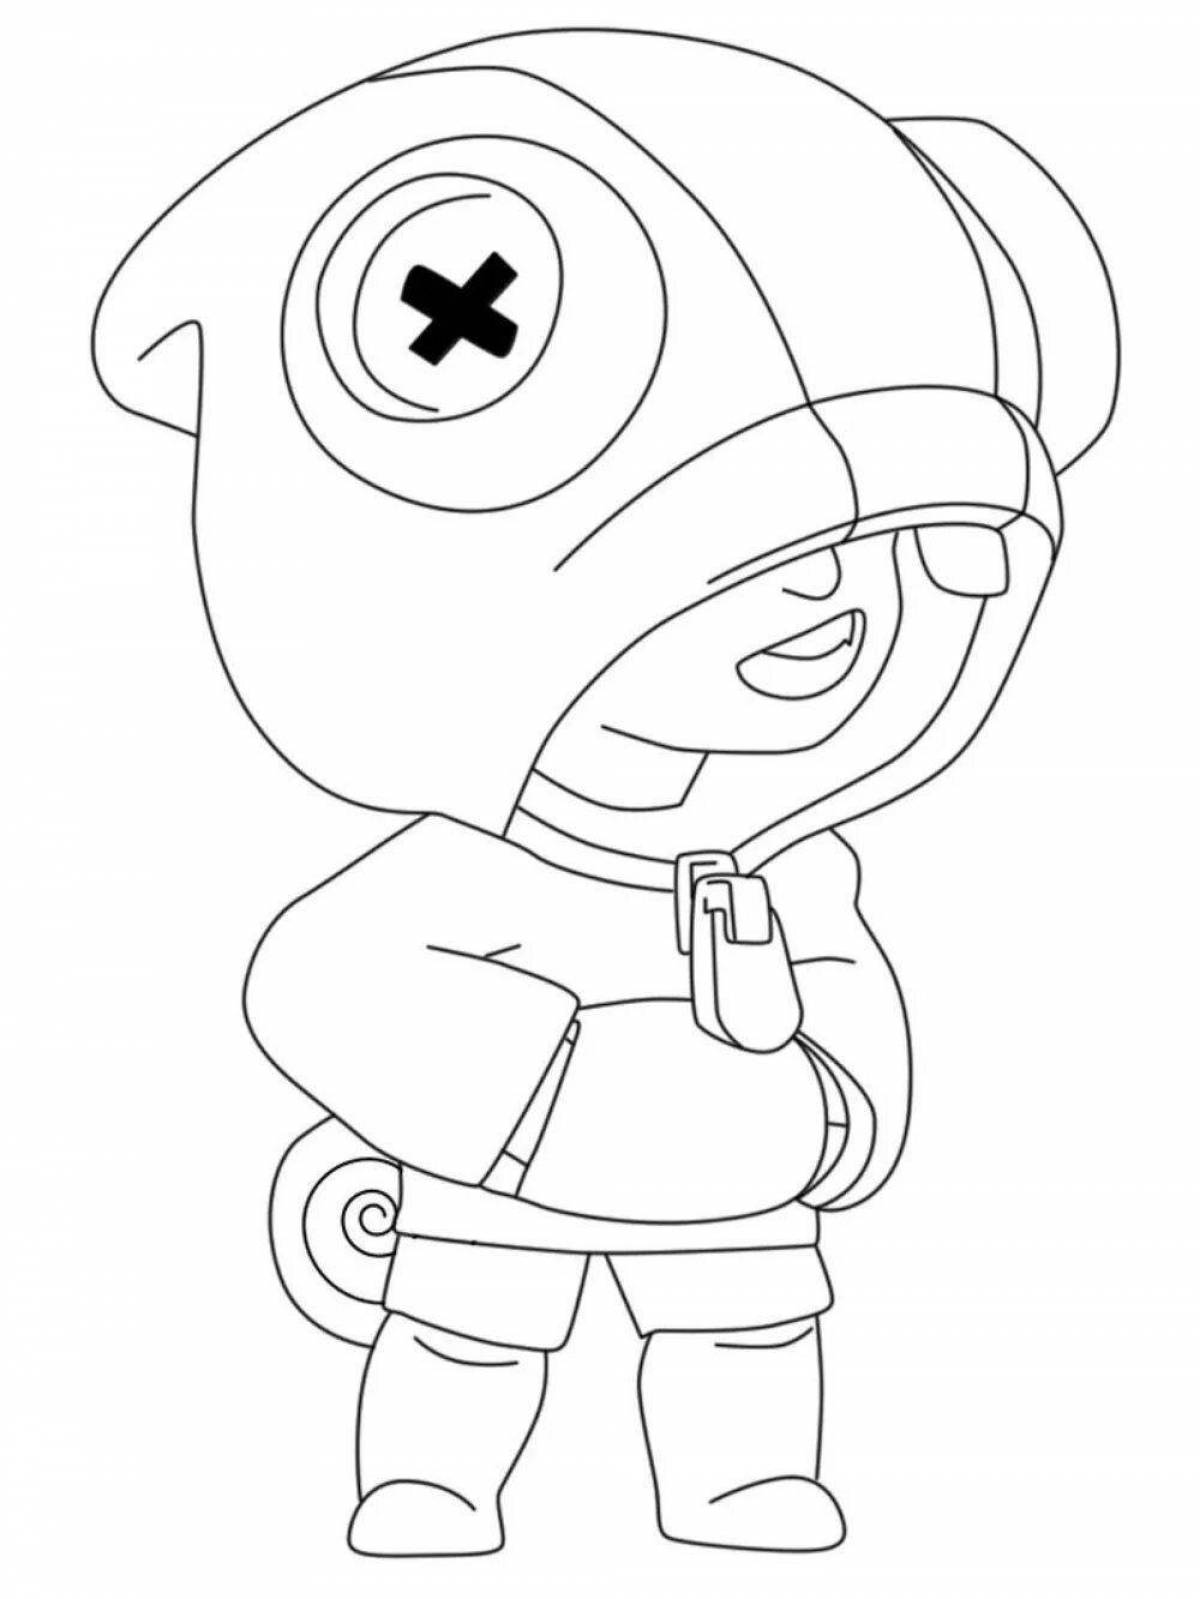 Sandy from brawl stars gorgeous coloring book